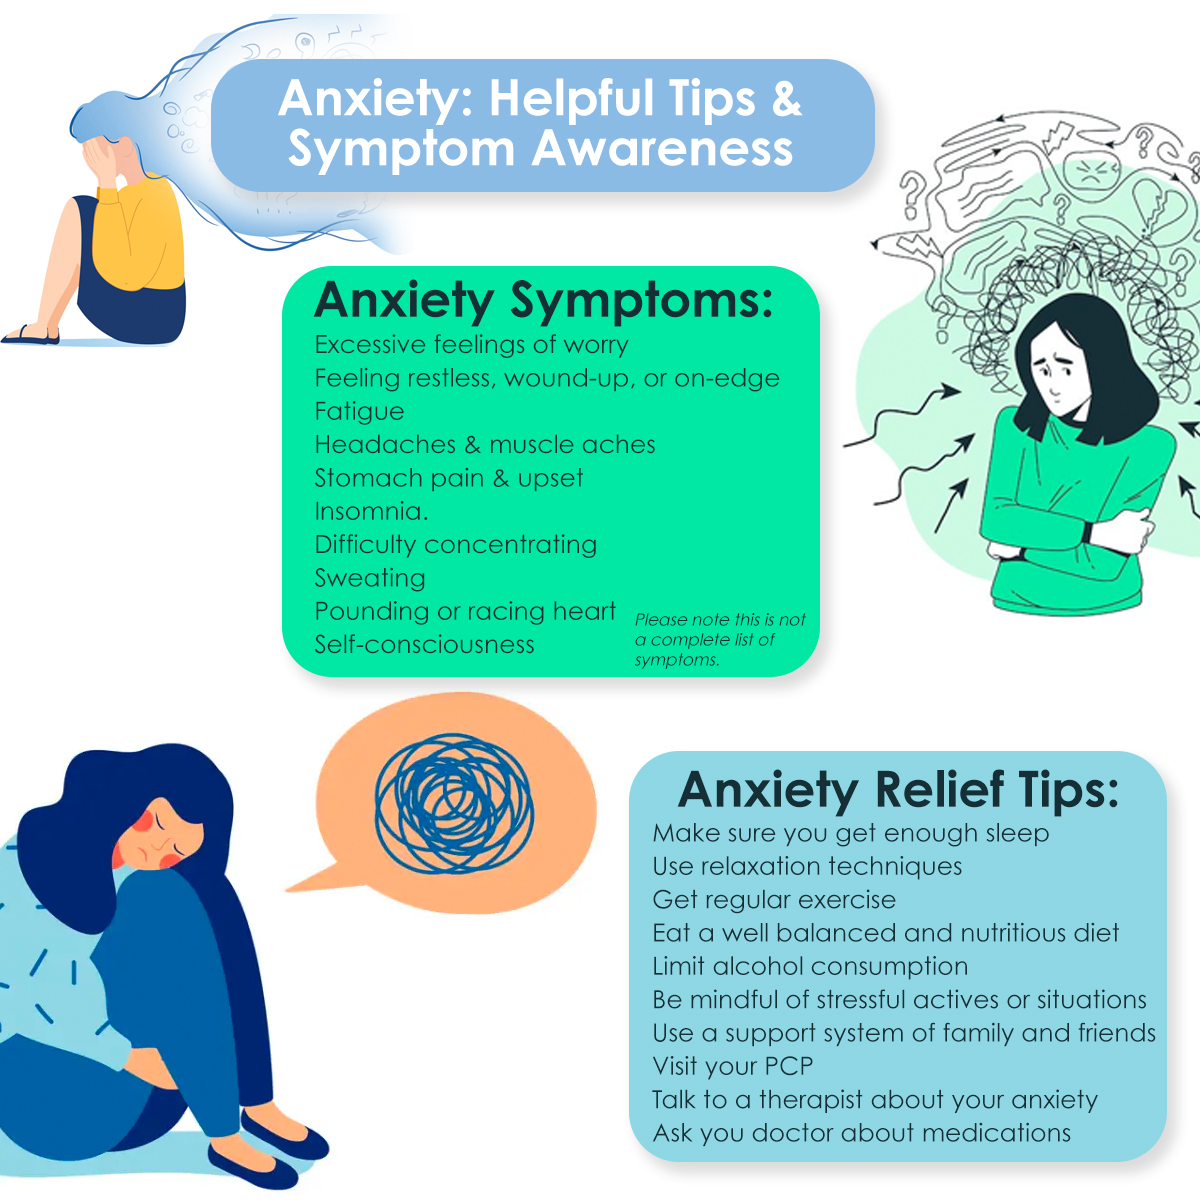 We want to provide some helpful tips that you can use to help with your anxiety.
#anxiety #anxietytips #anxietyrelief #anxietyrelieftips #anxietysupport #anxietyhelp #anxietyawareness #anxietymanagement #anxietyrecovery #anxietyproblems #anxietyfighter #anxietyisreal